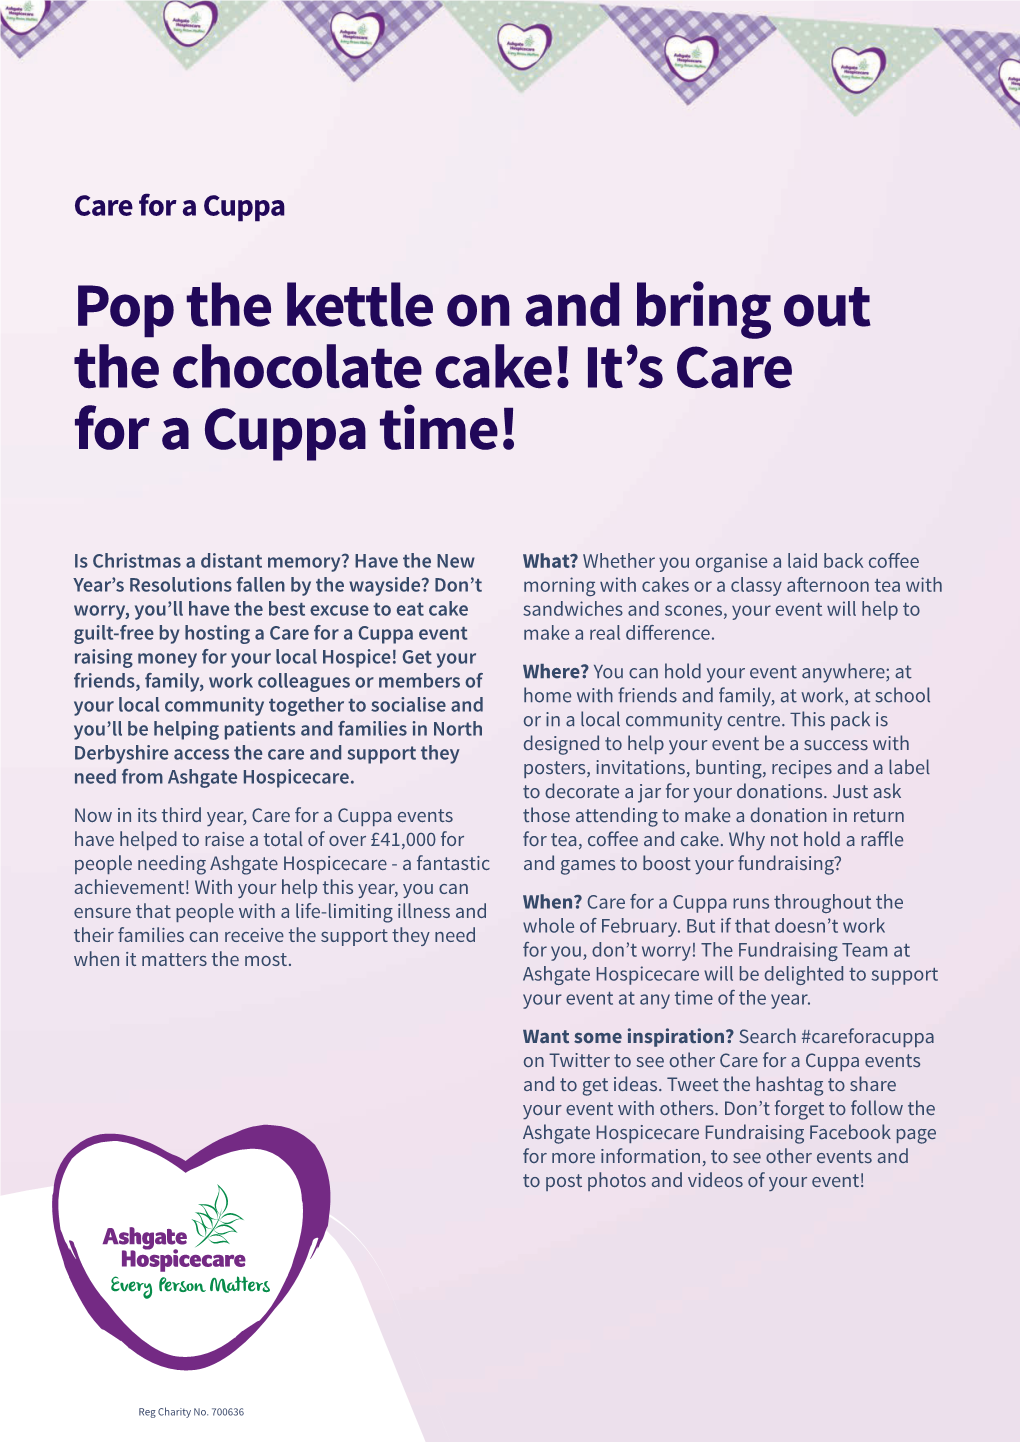 Pop the Kettle on and Bring out the Chocolate Cake! It's Care for a Cuppa Time!